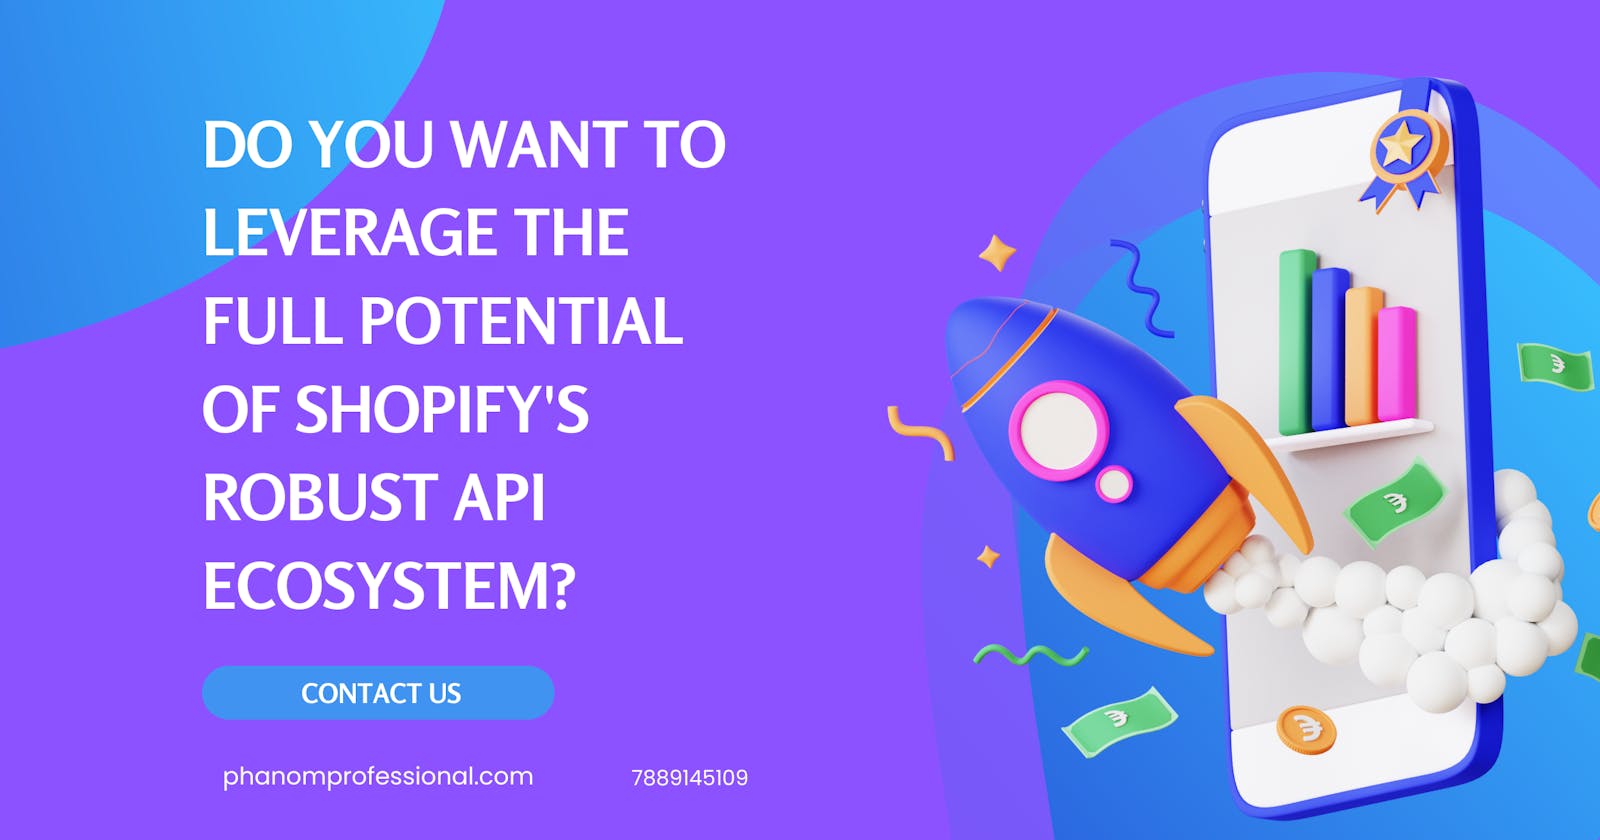 Do you want to leverage the full potential of Shopify's robust API ecosystem?